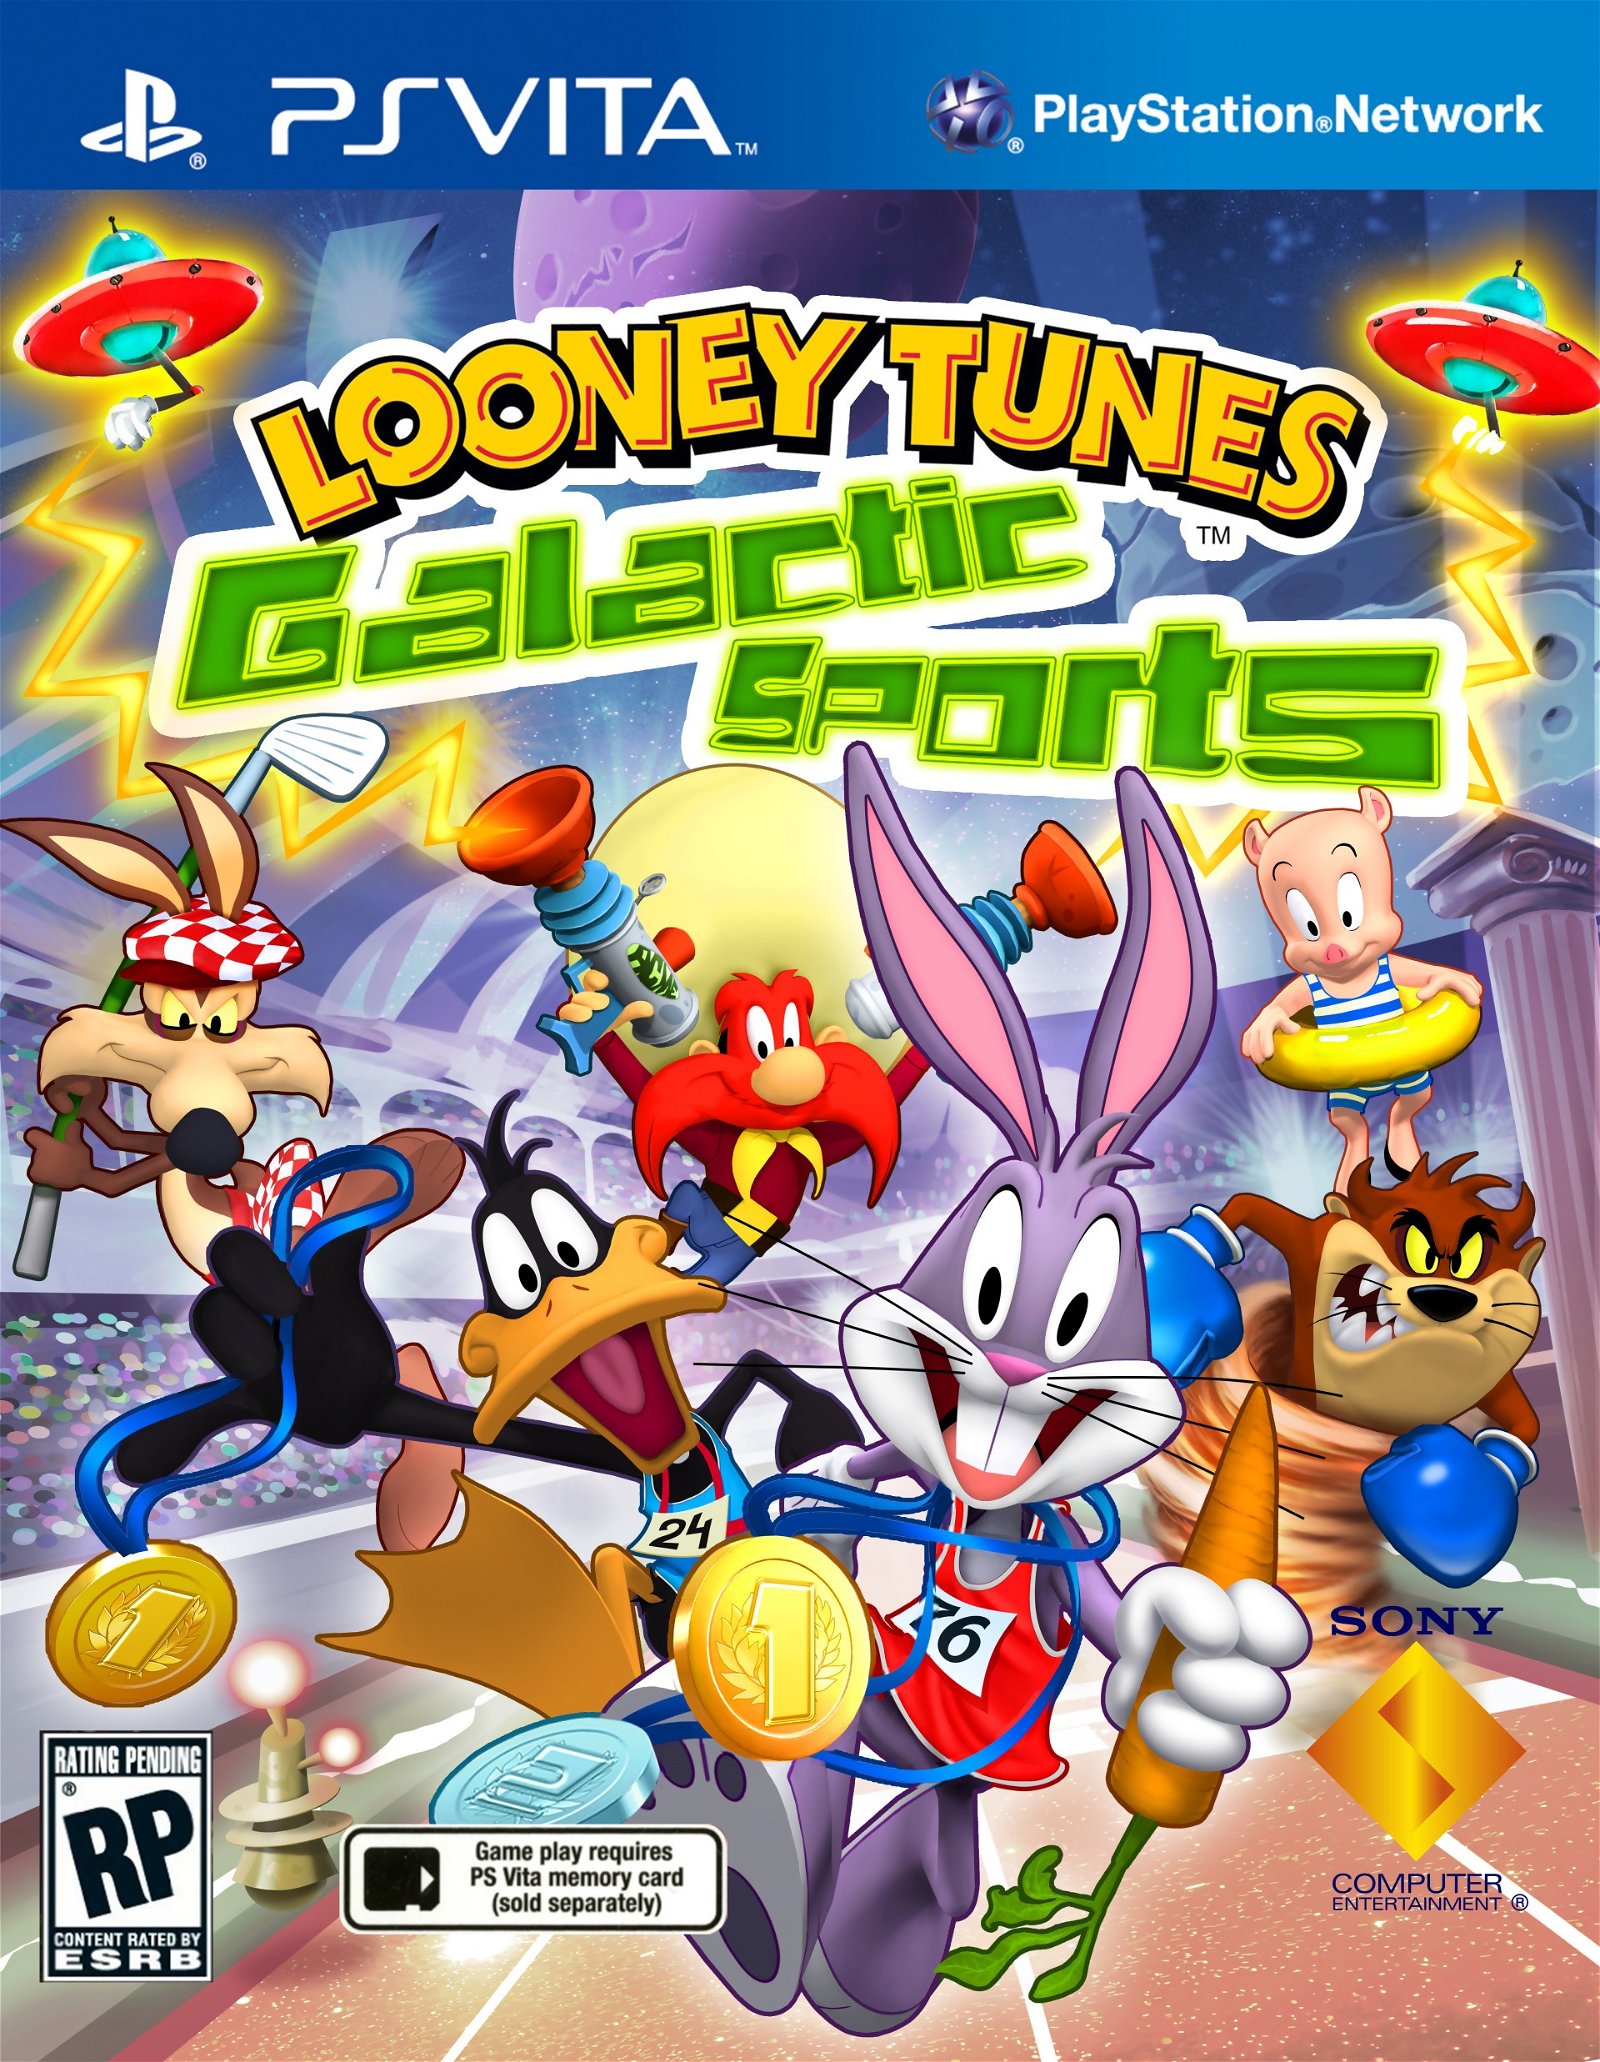 Image of Looney Tunes Galactic Sports